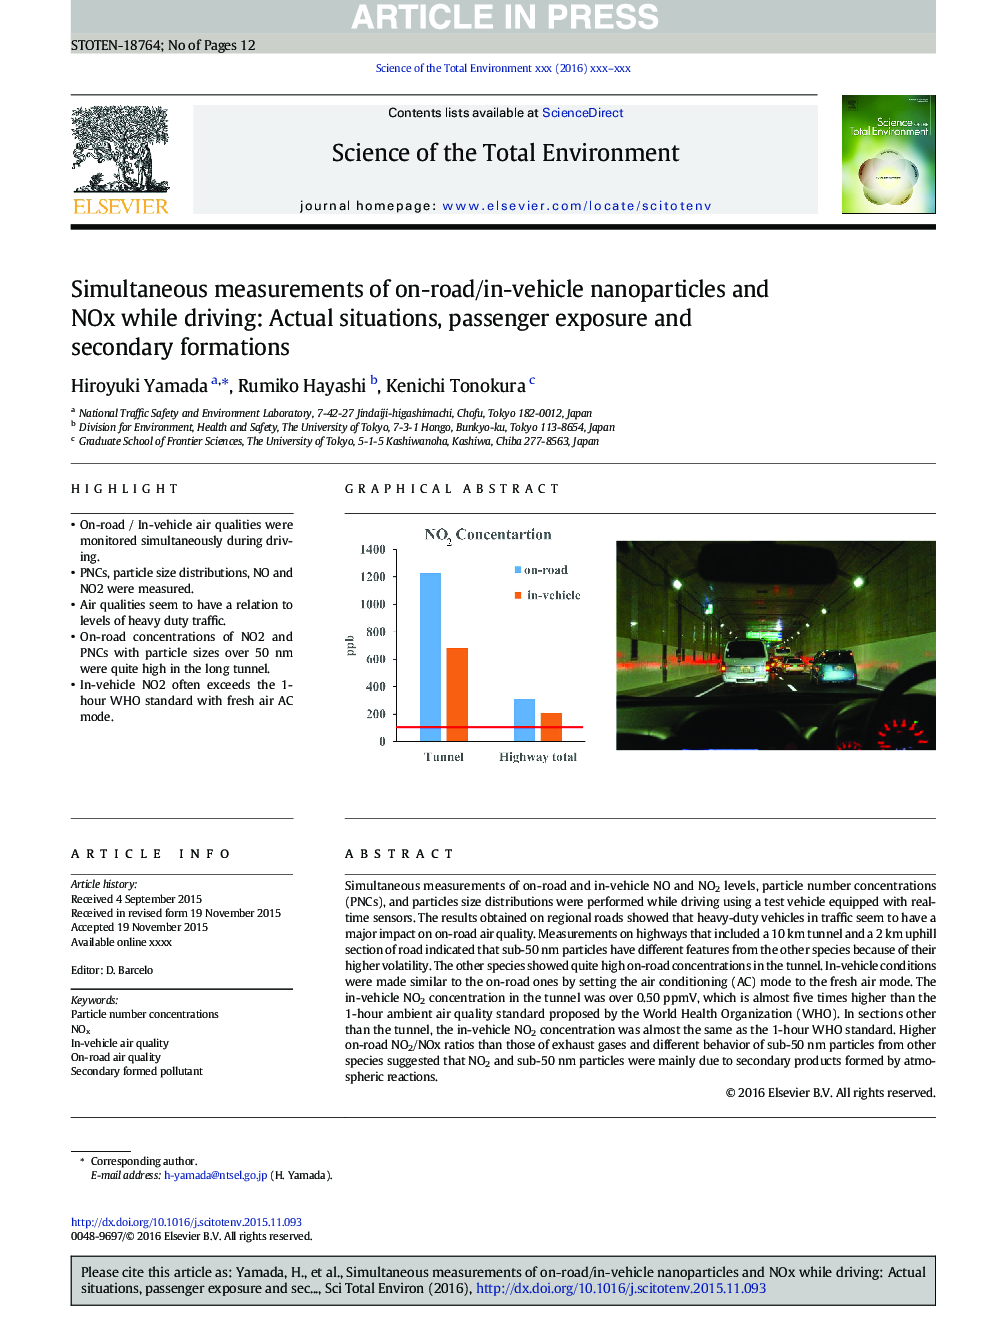 Simultaneous measurements of on-road/in-vehicle nanoparticles and NOx while driving: Actual situations, passenger exposure and secondary formations